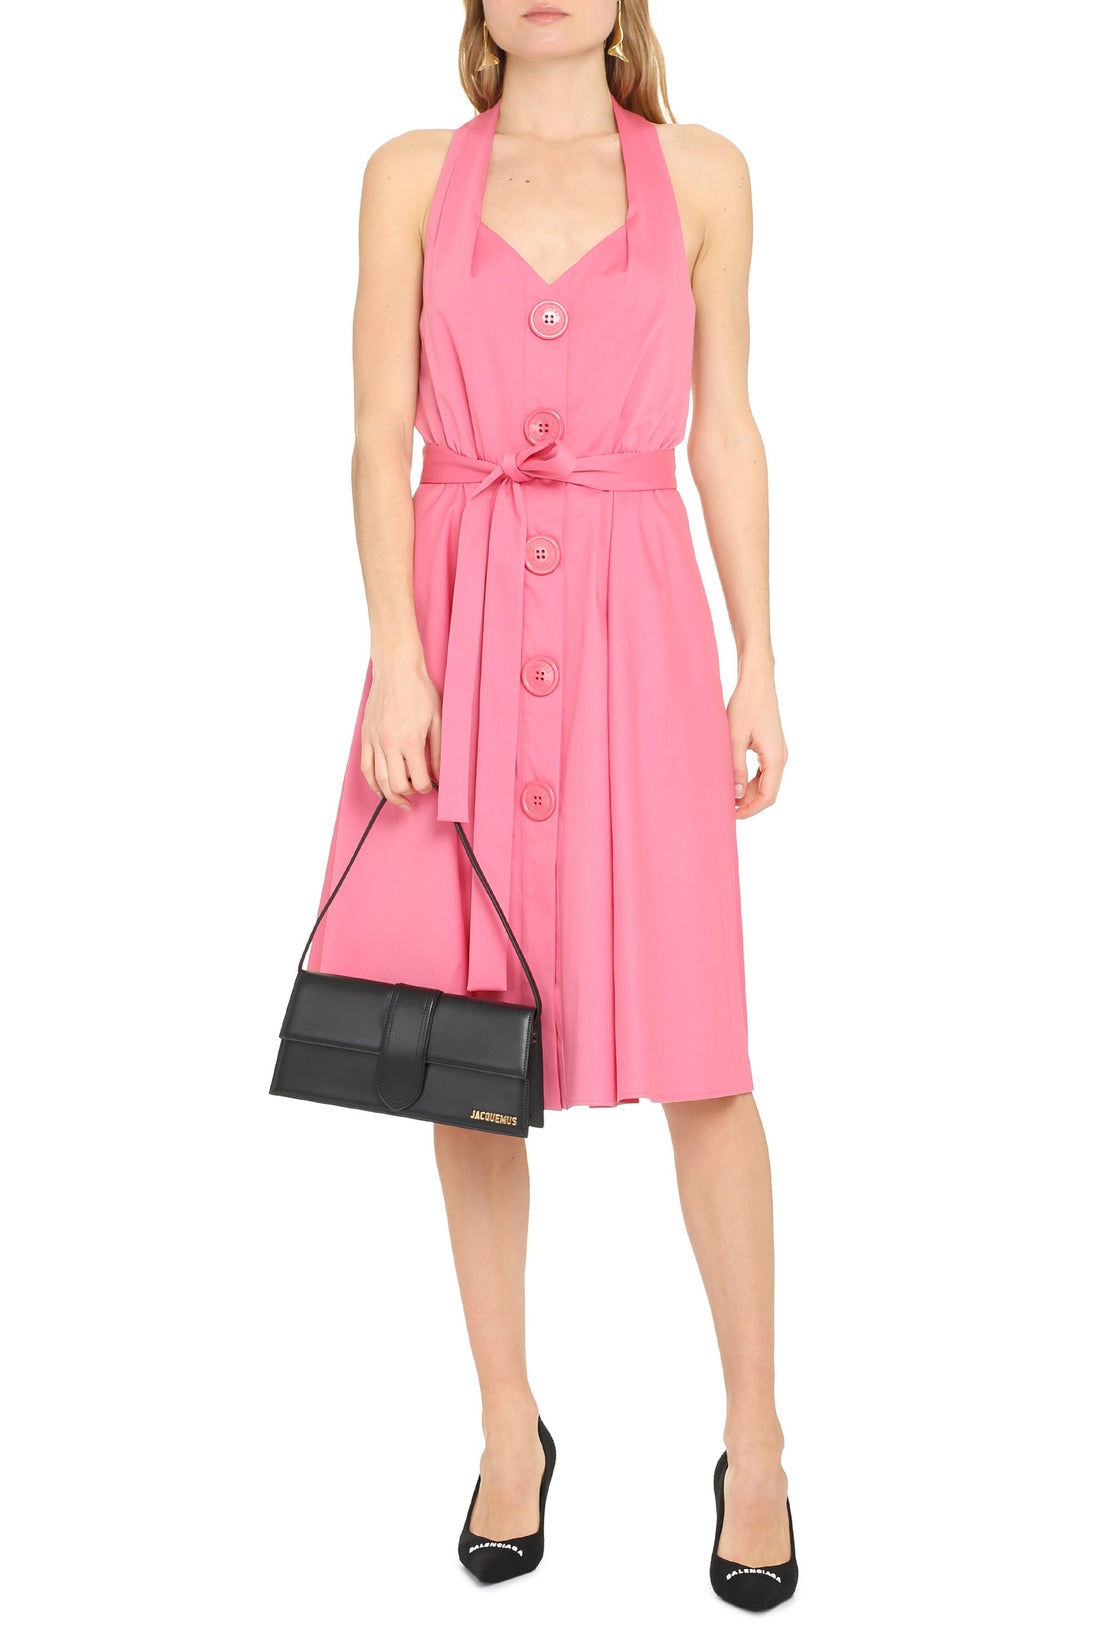 Moschino-OUTLET-SALE-A-line dress-ARCHIVIST